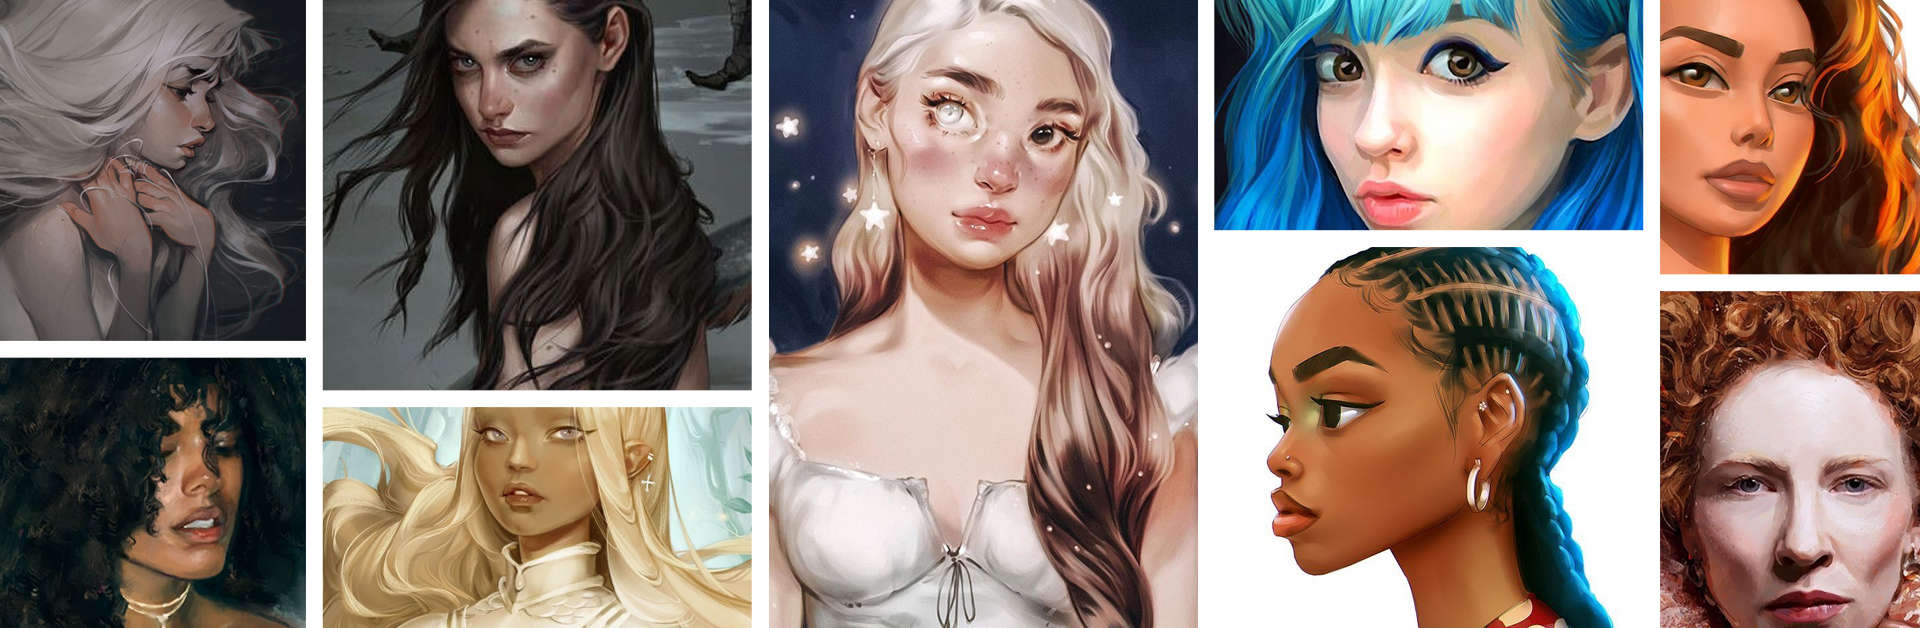 31 Stylish Examples of Digitally Painted Hairstyles  Paintable